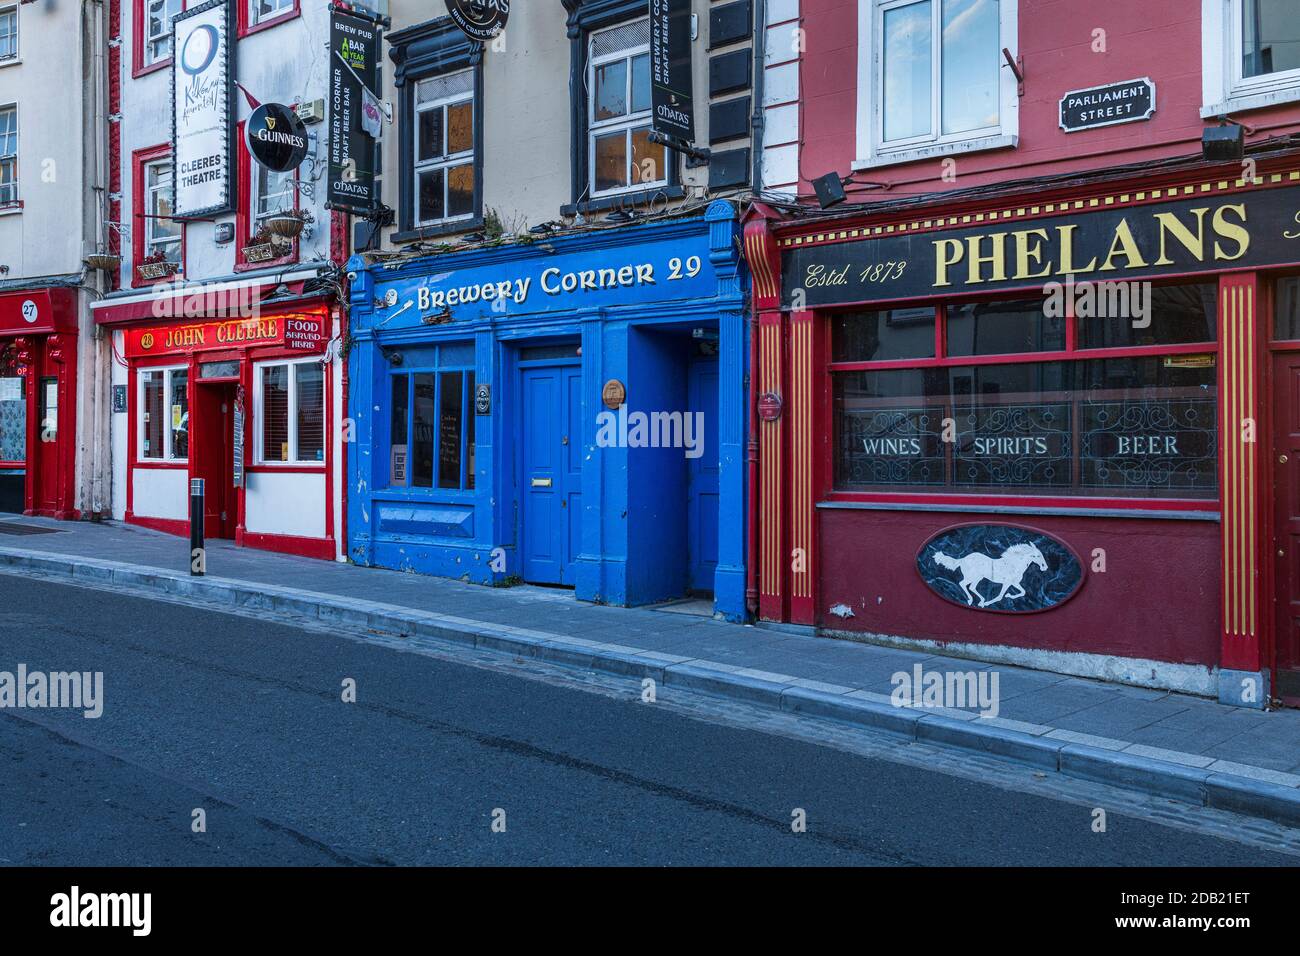 John Cleere, Brewery Corner and Phelans public houses on Parliament street, Kilkenny, in the early evening, County Kilkenny, Ireland Stock Photo